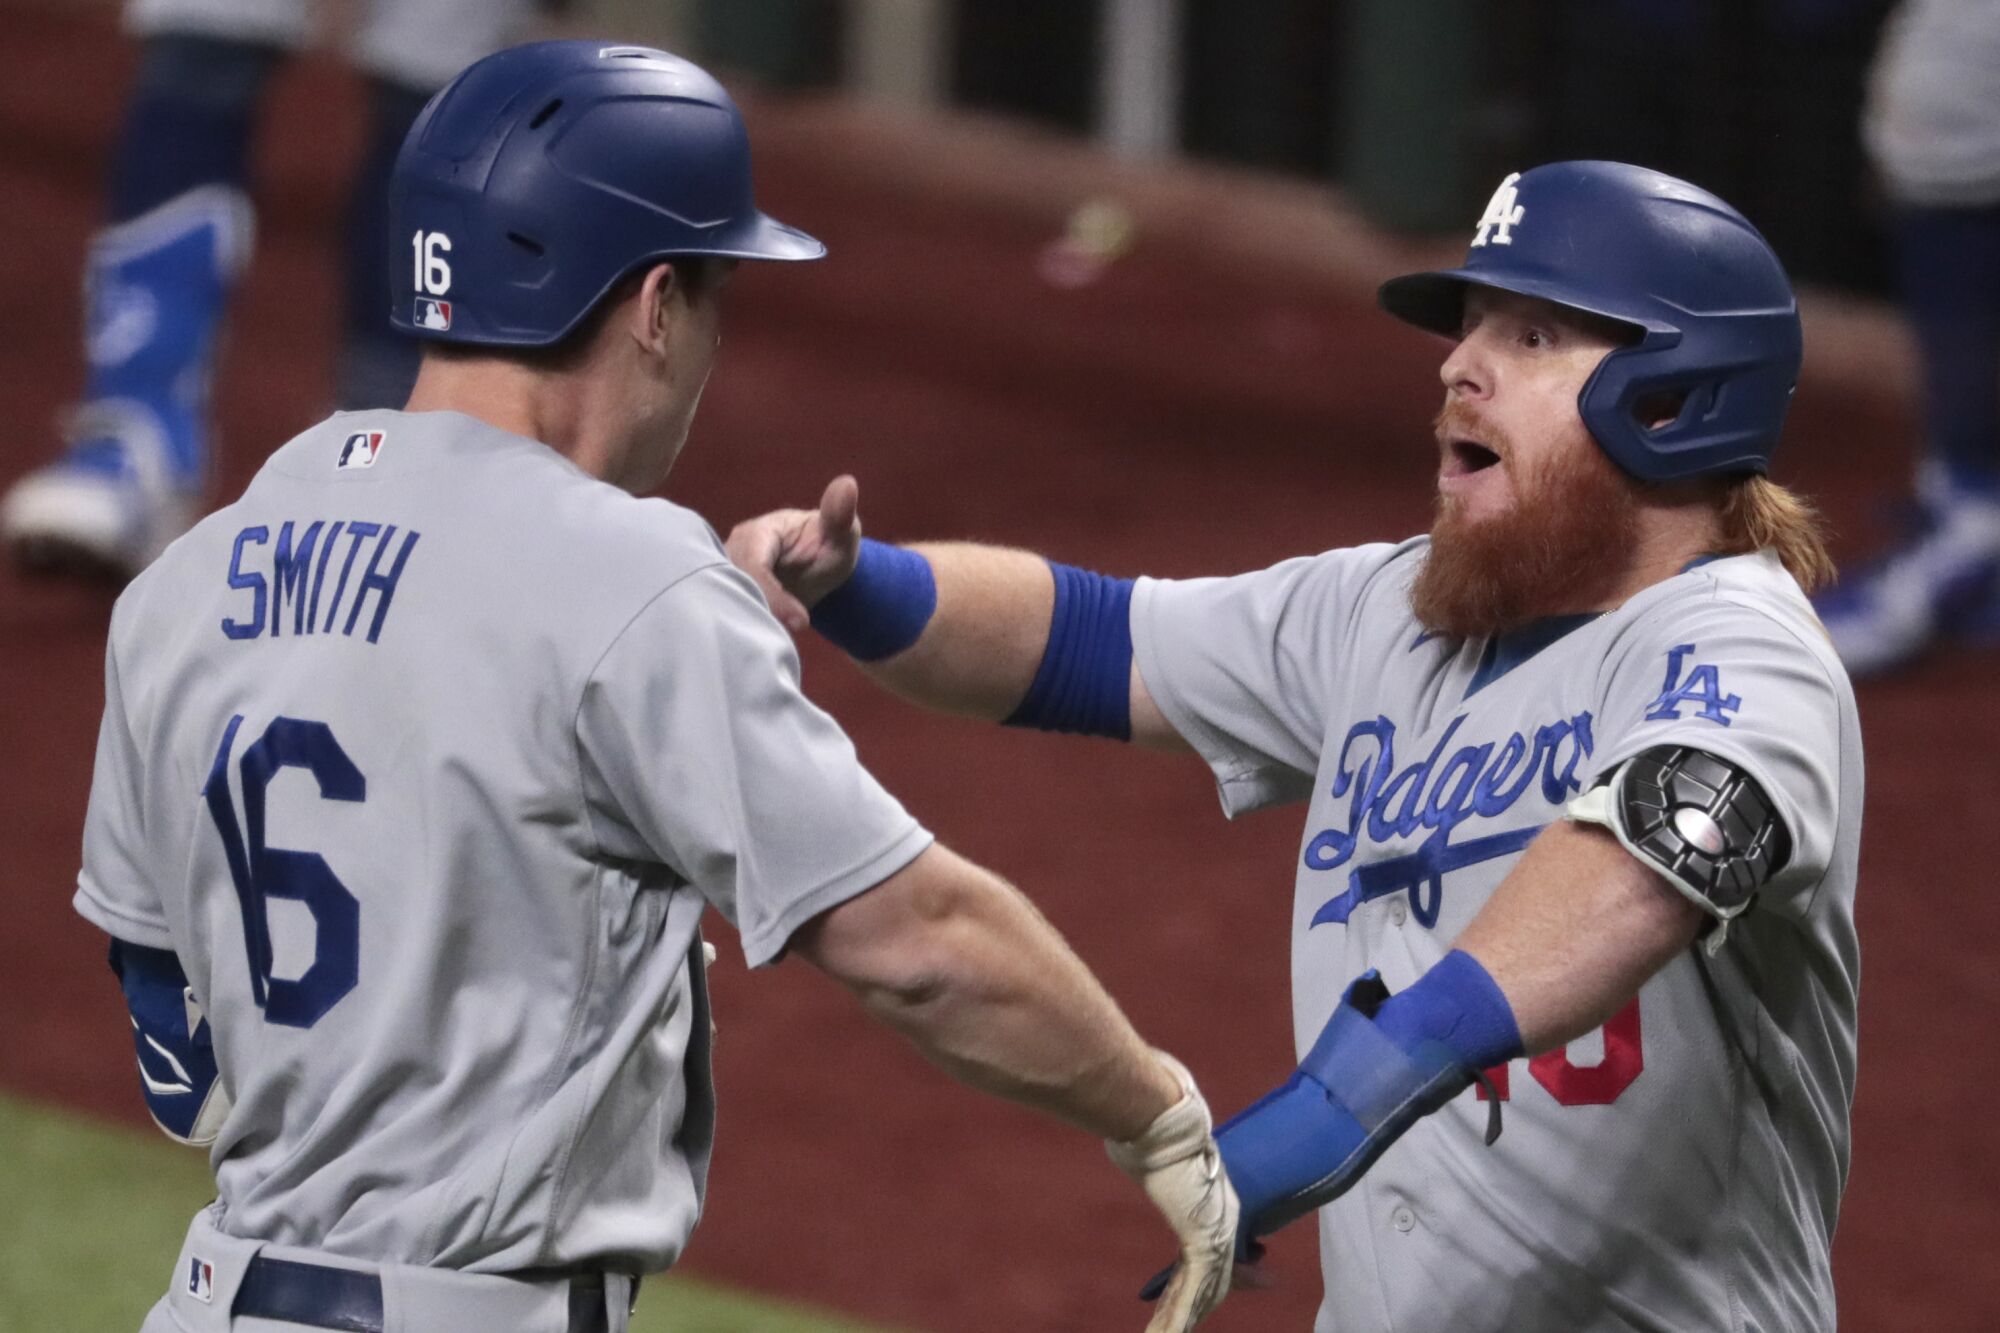 Will Smith, left, celebrates with Dodgers teammate Justin Turner after hitting a three-run home run.